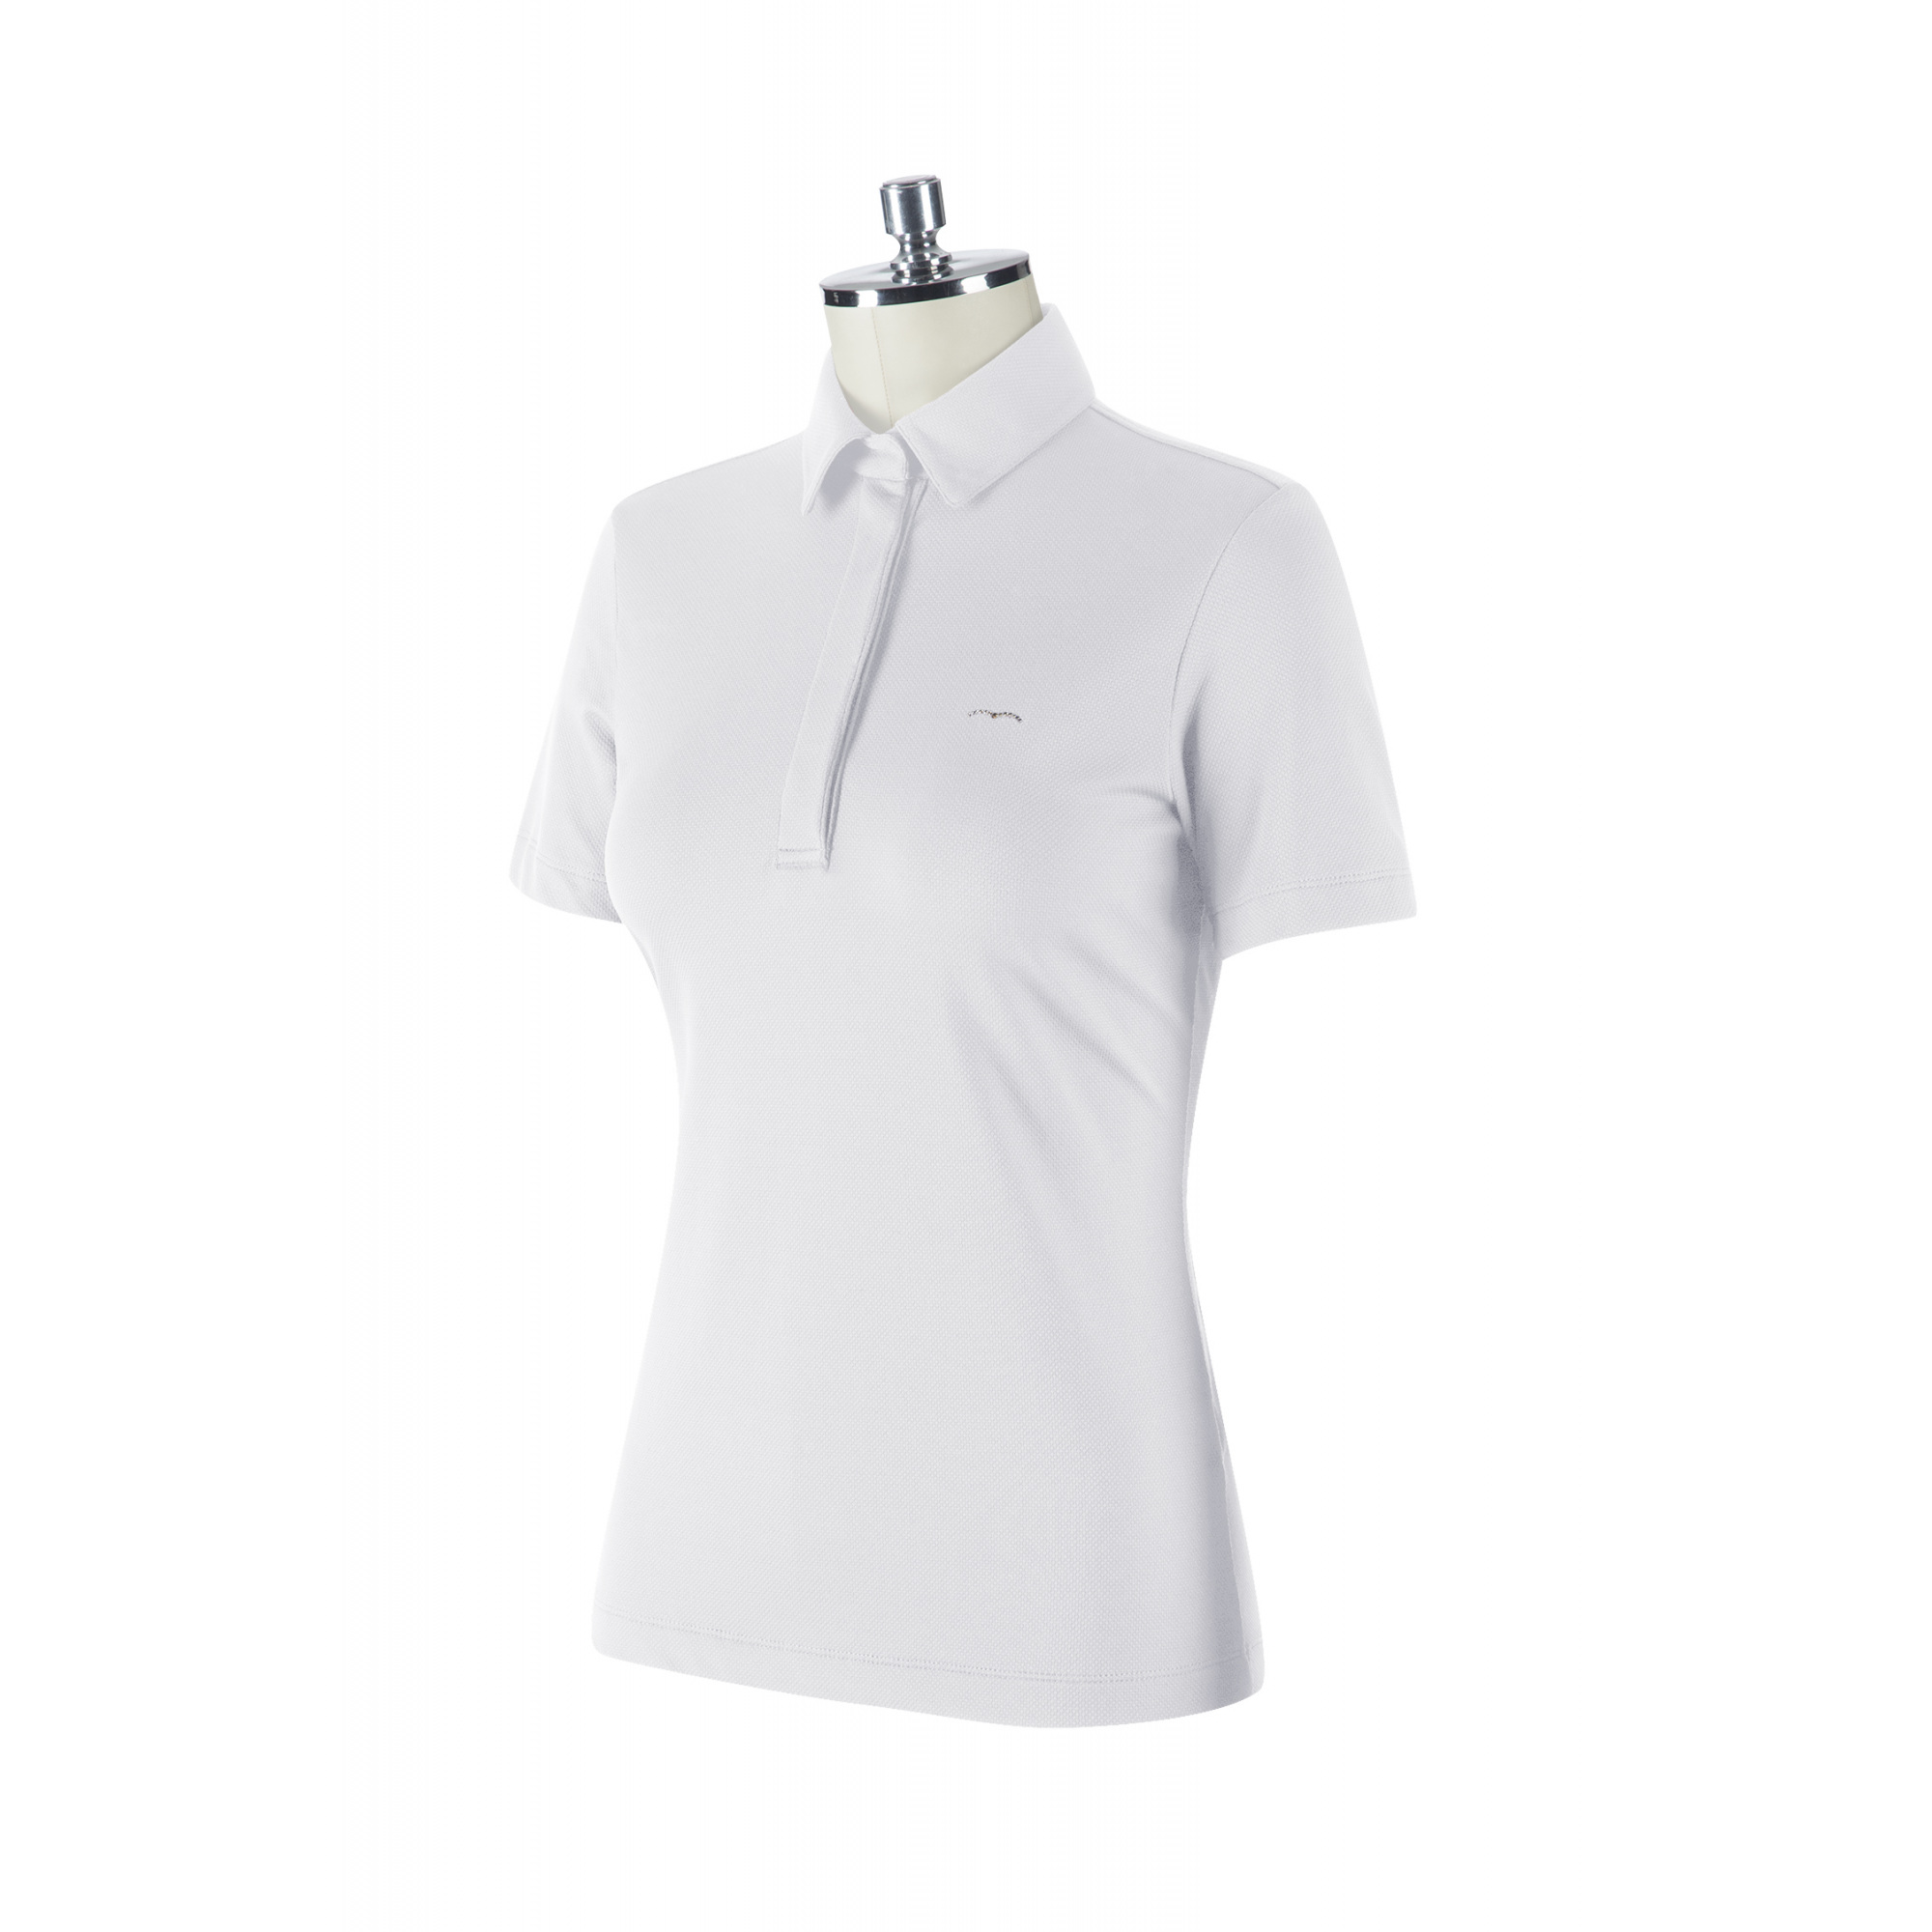 ANIMO BRID Ladies Short Sleeve Polo Shirt in Silver 